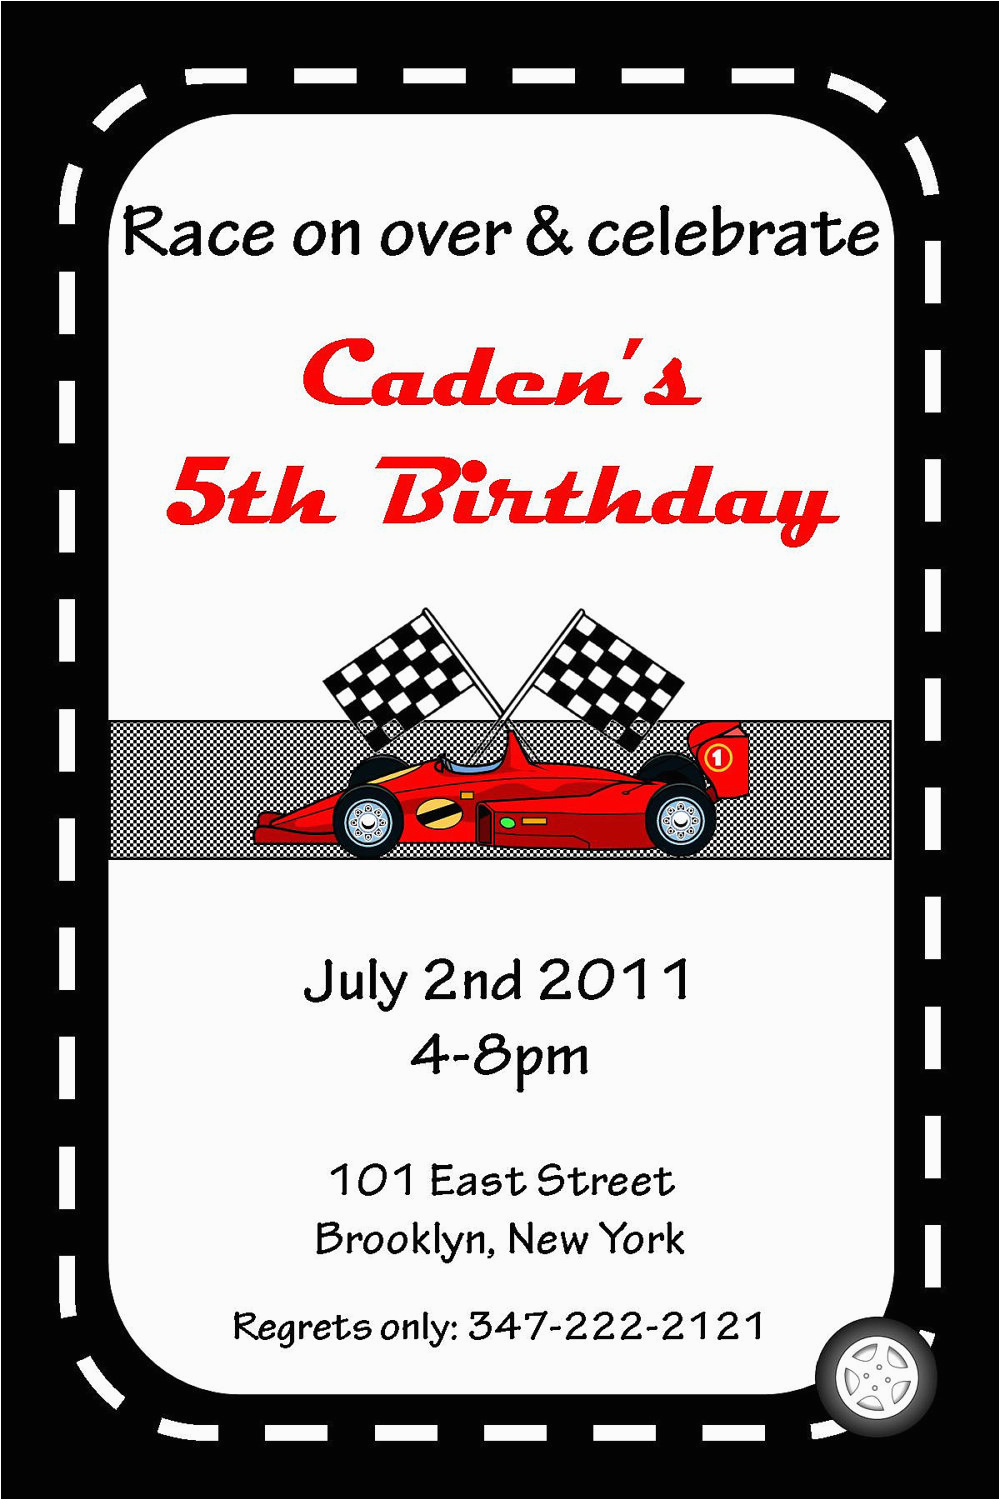 5 best images of race car invitations printable race car